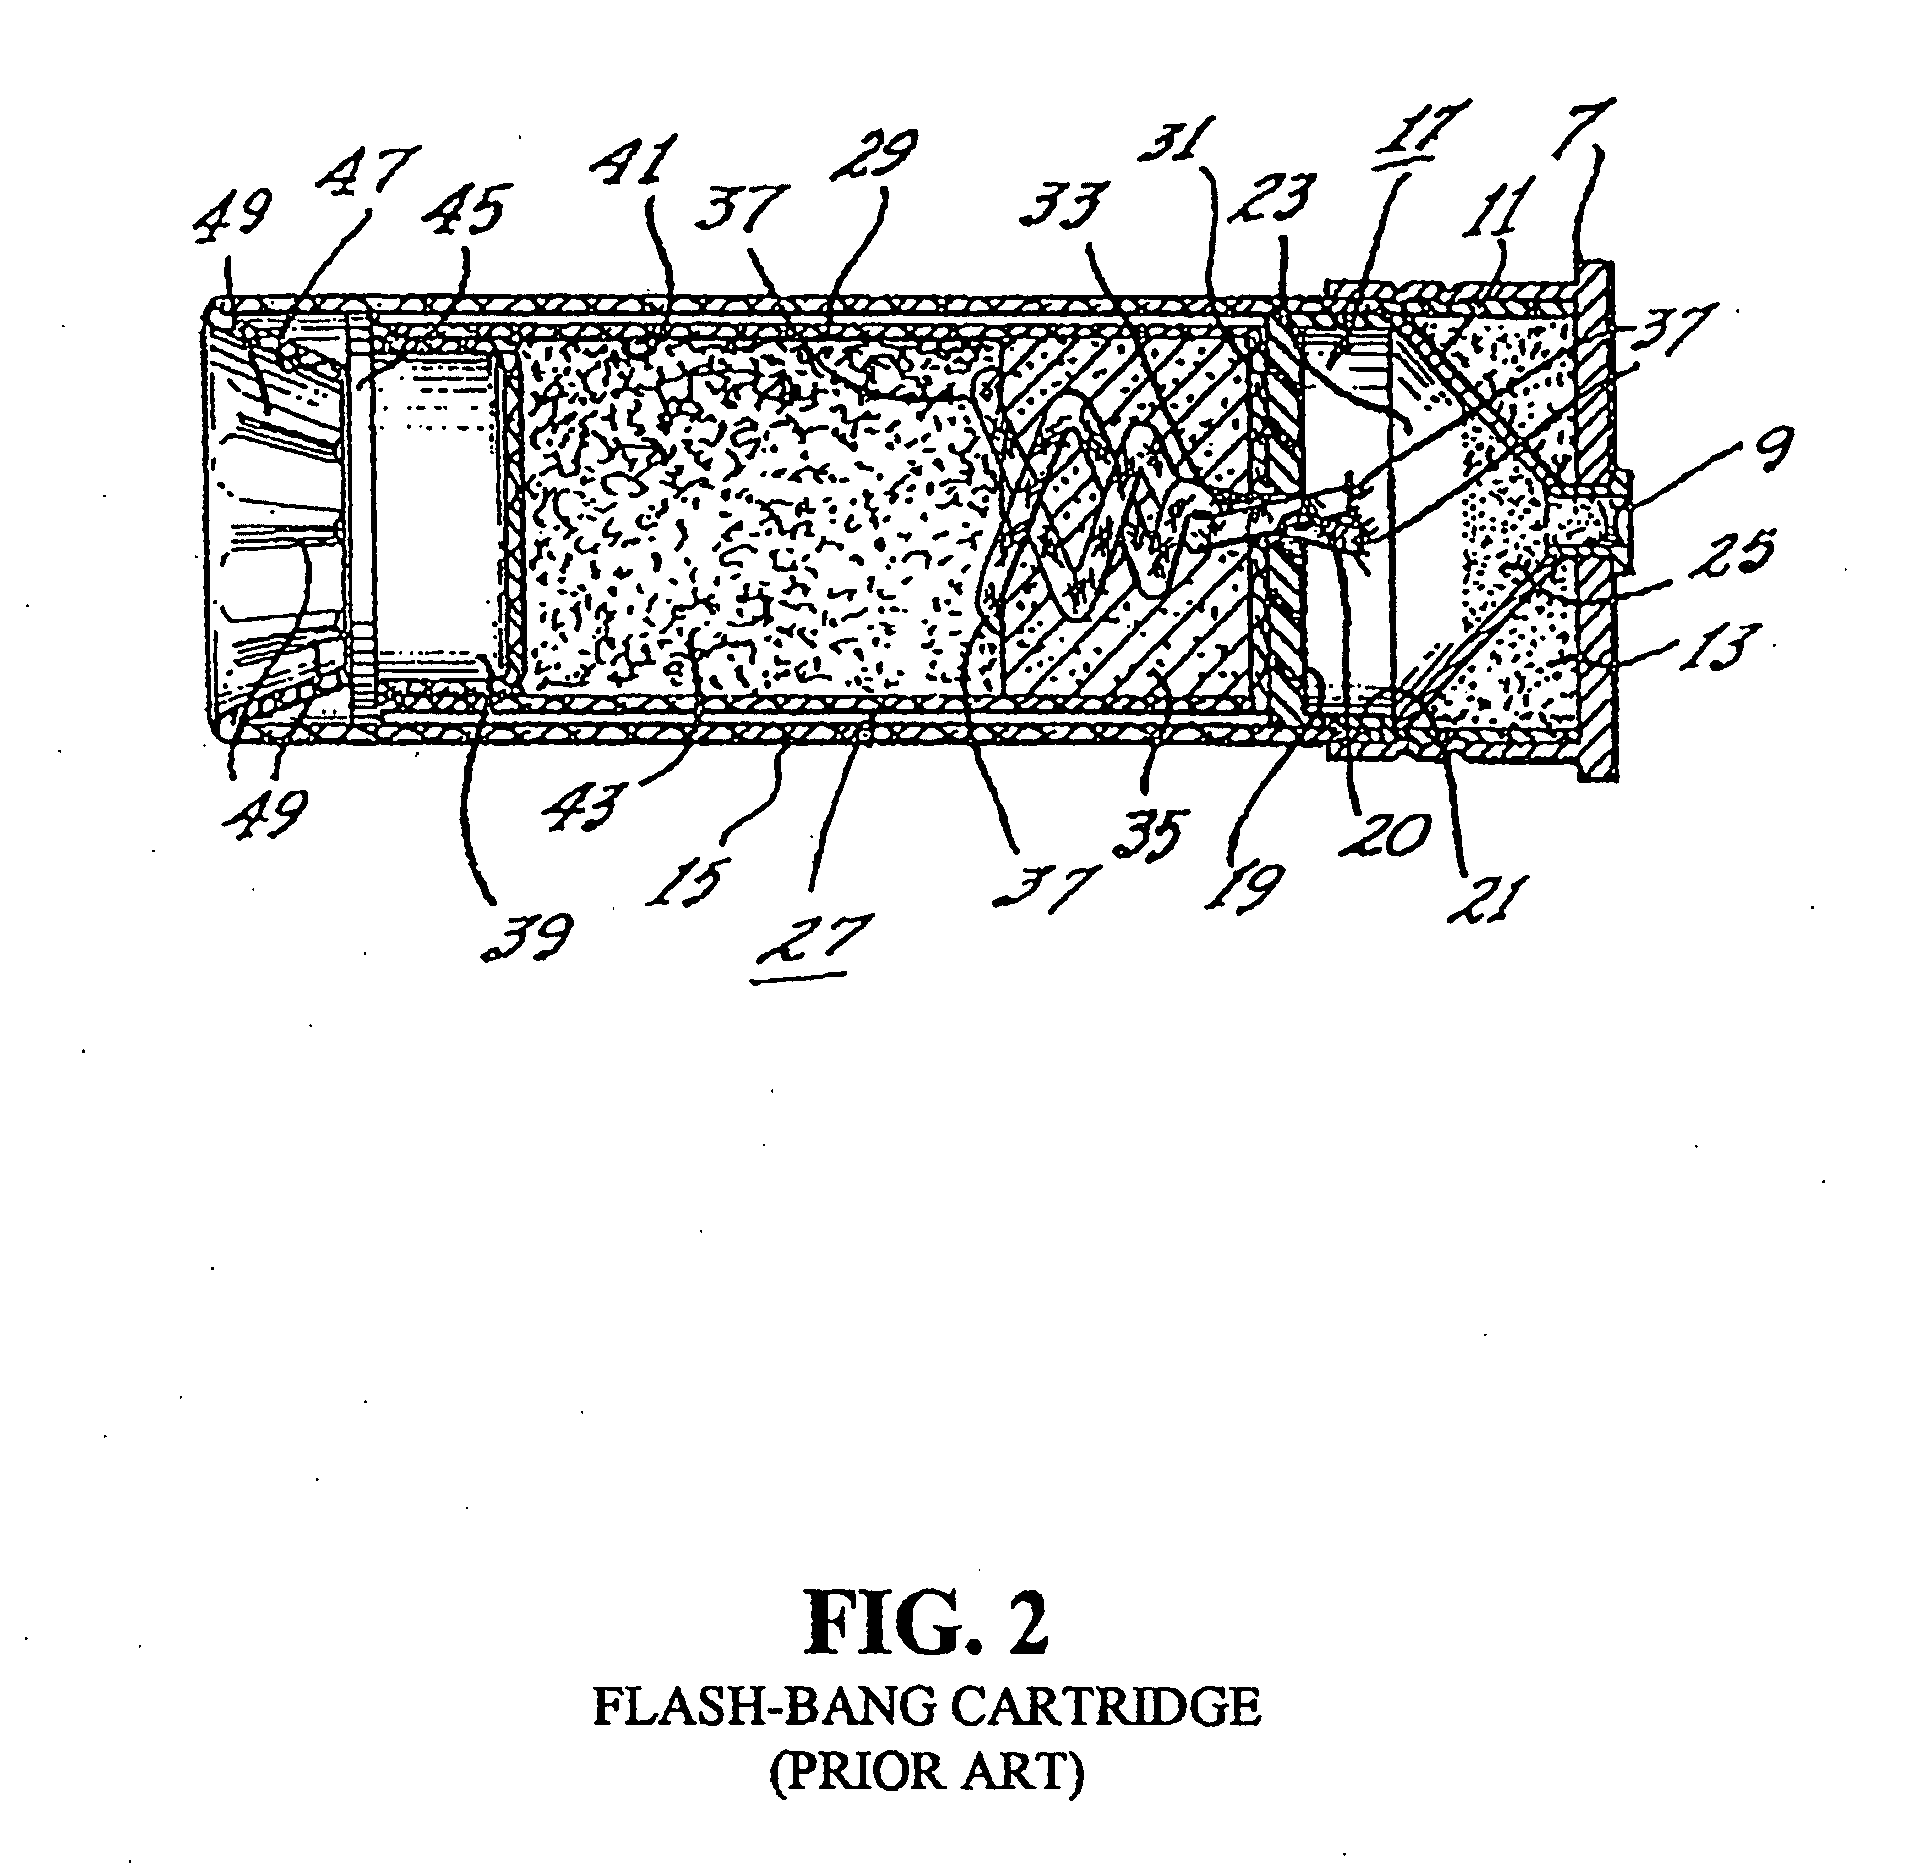 Flare-bang projectile